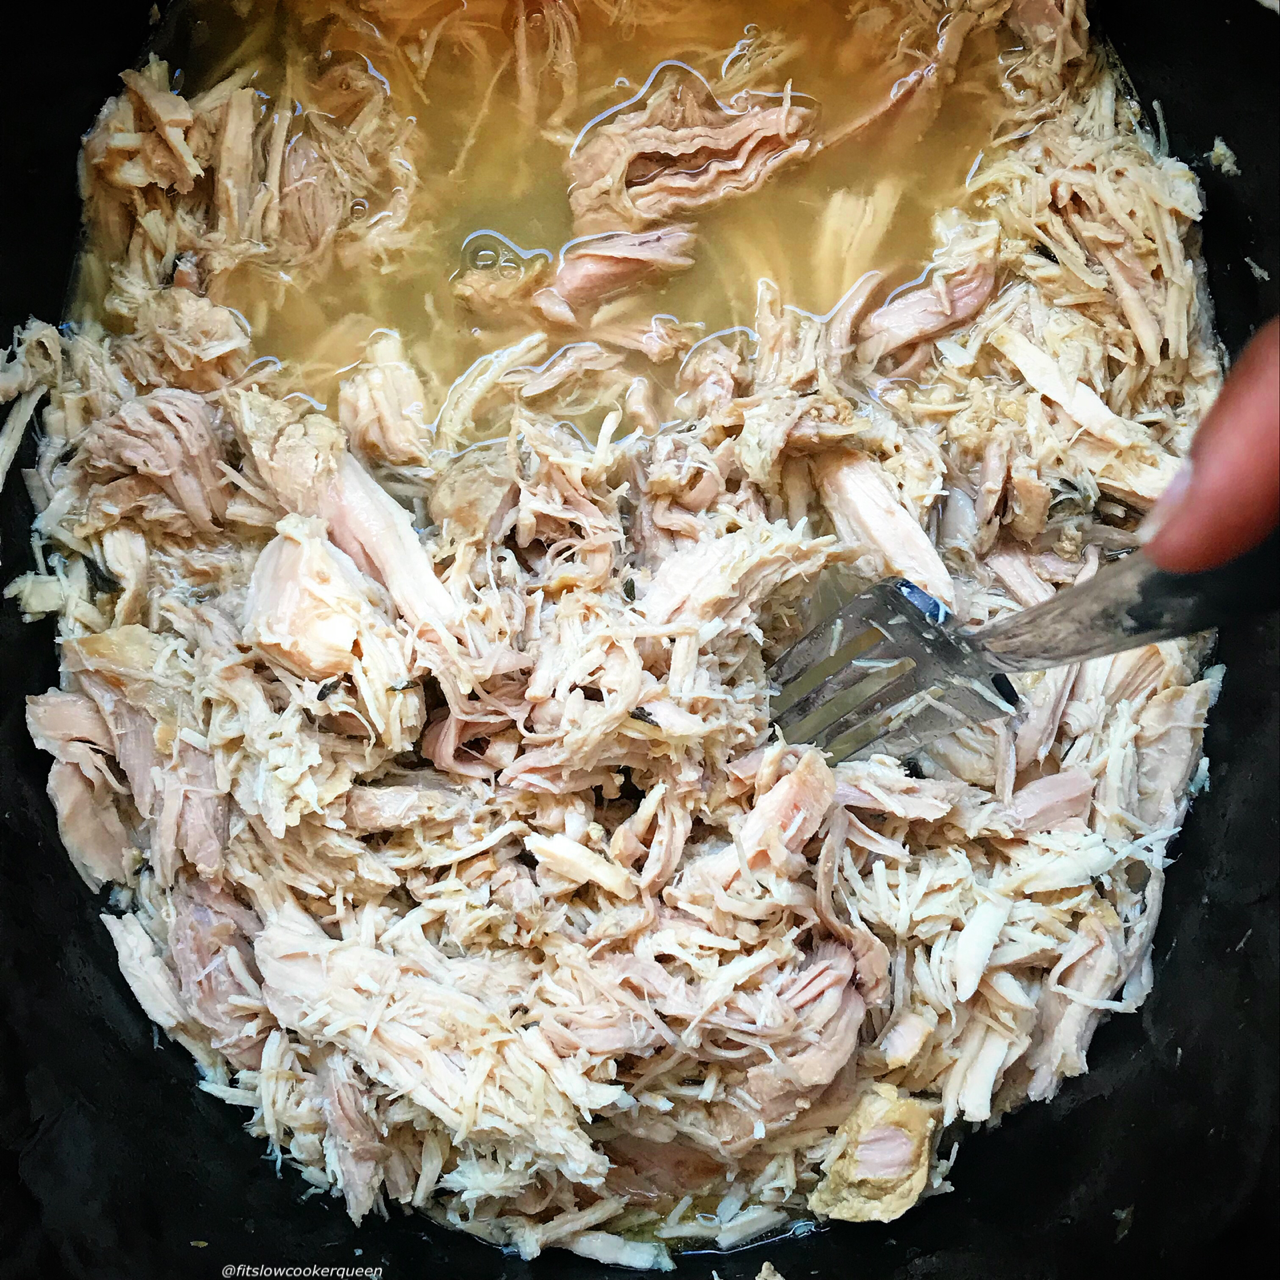 This copycat Chipotle carnitas recipe is just as good as the restaurants! Made in the slow cooker it's more cost affordable while being healthy too. Being low-carb, paleo, whole30, keto and more, you can use this carnitas meat in so many ways.